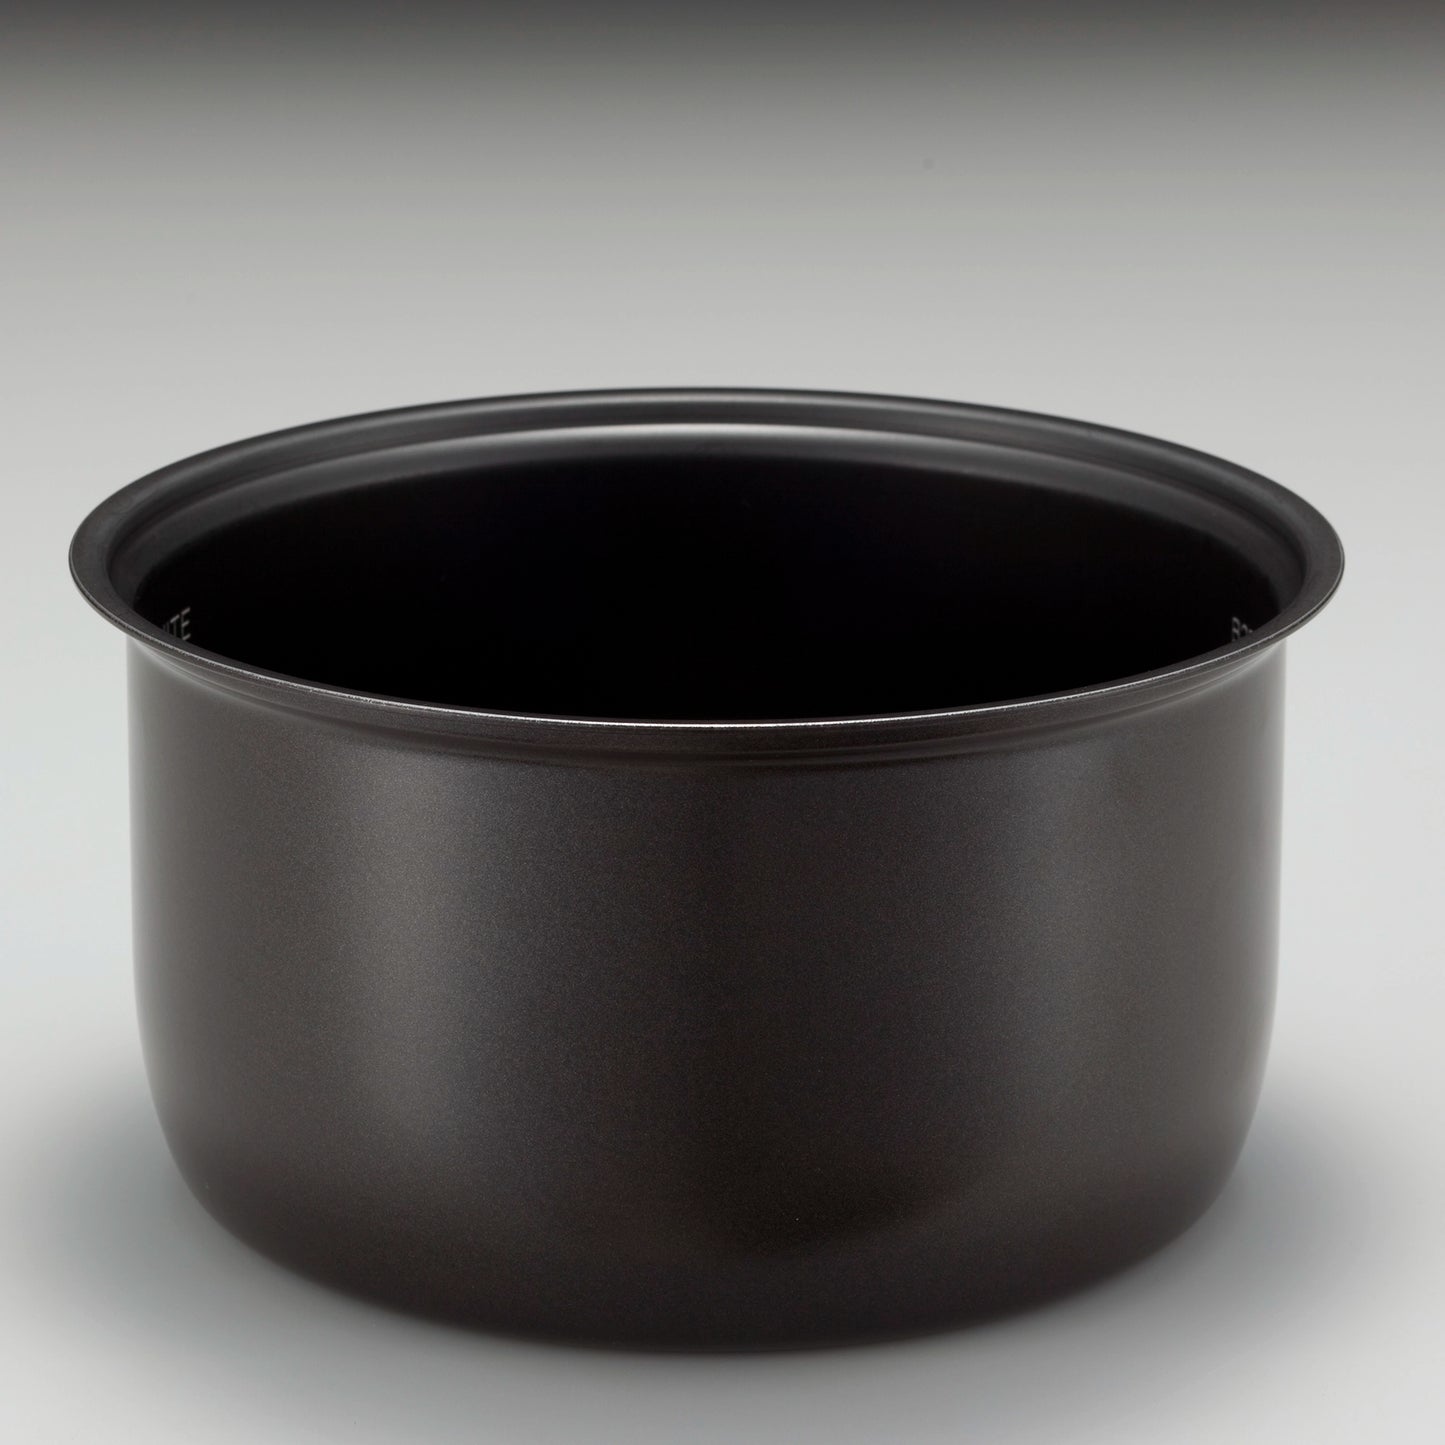 Black thick inner cooking pan and heating system provide even heating for perfectly cooked rice